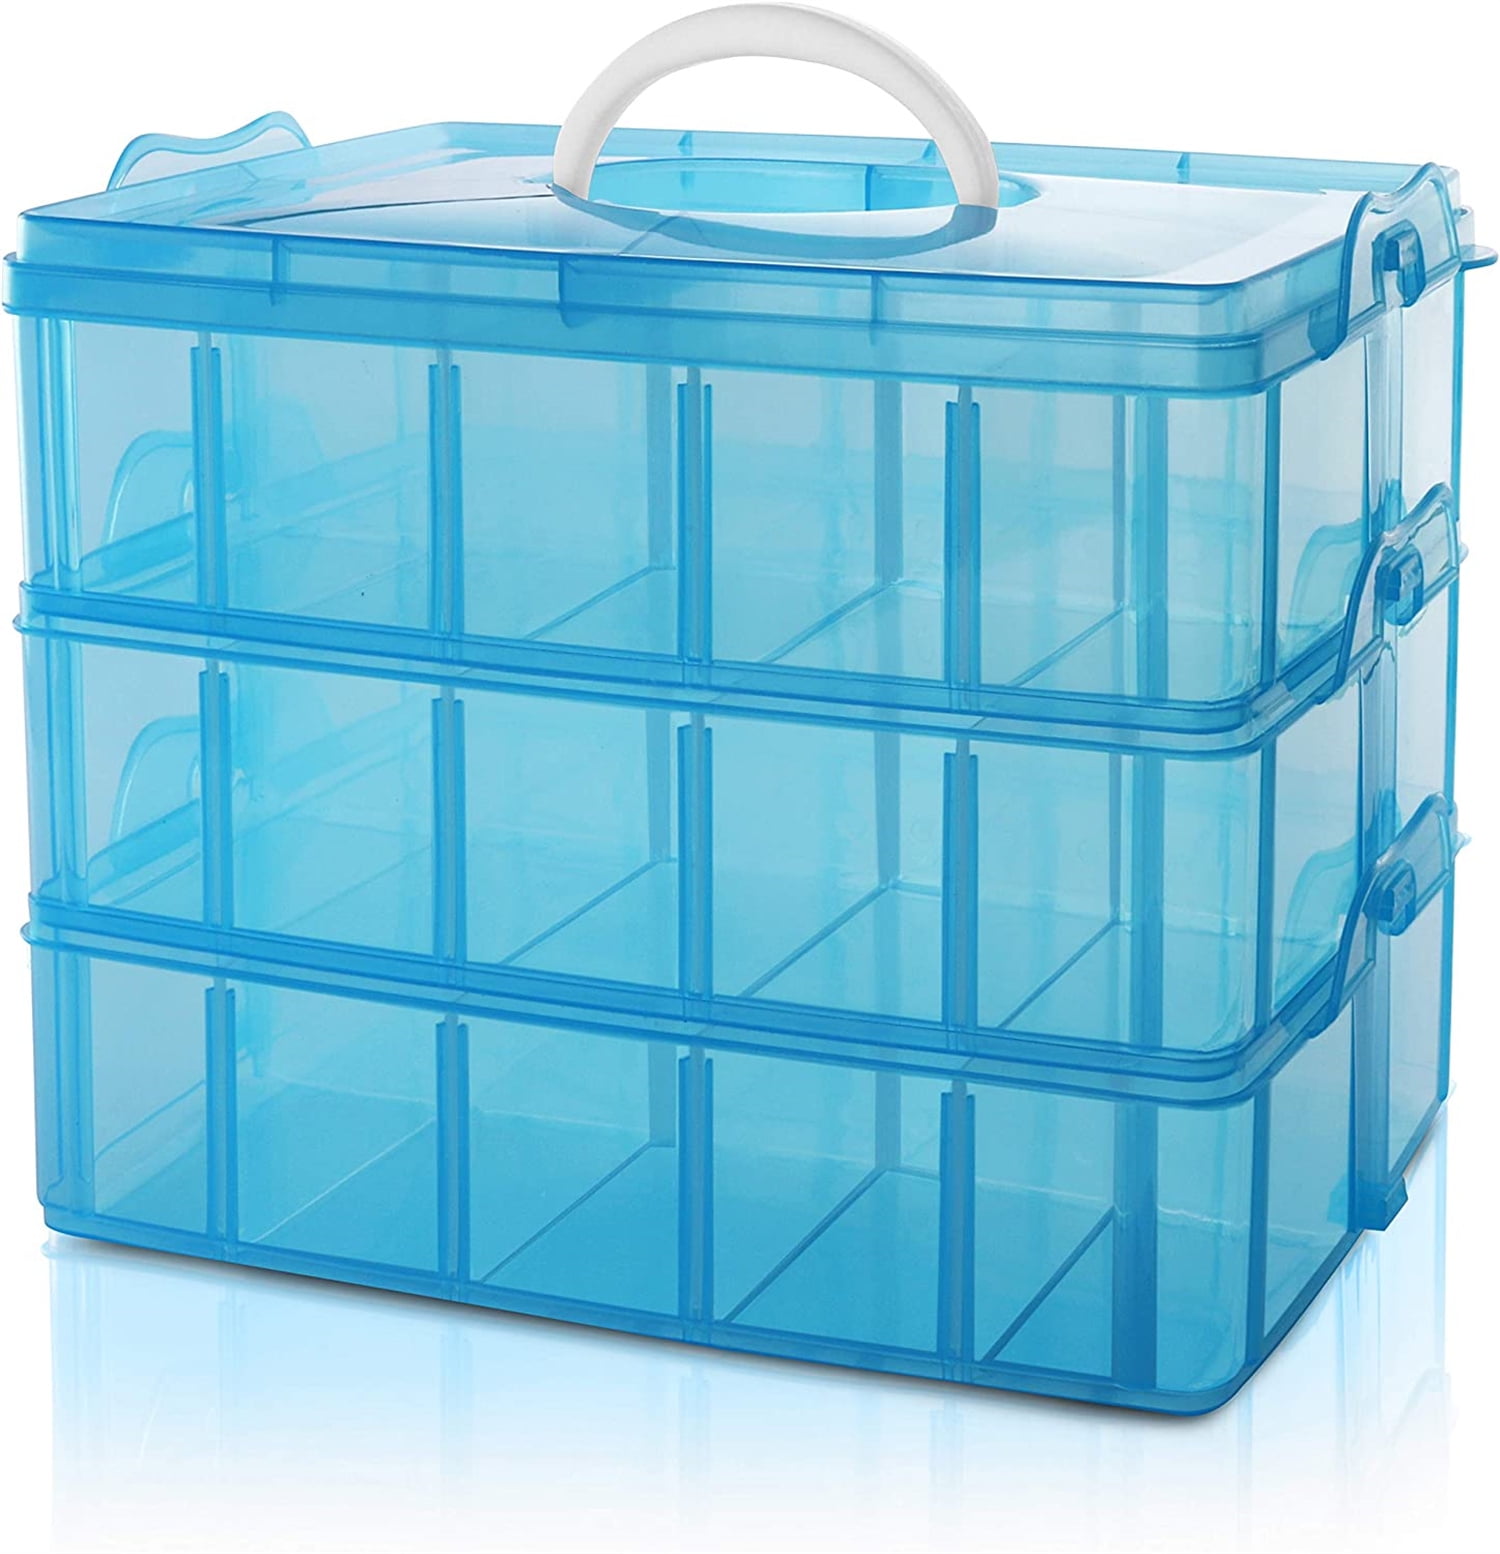 Stacking Storage Box With 9 Compartments